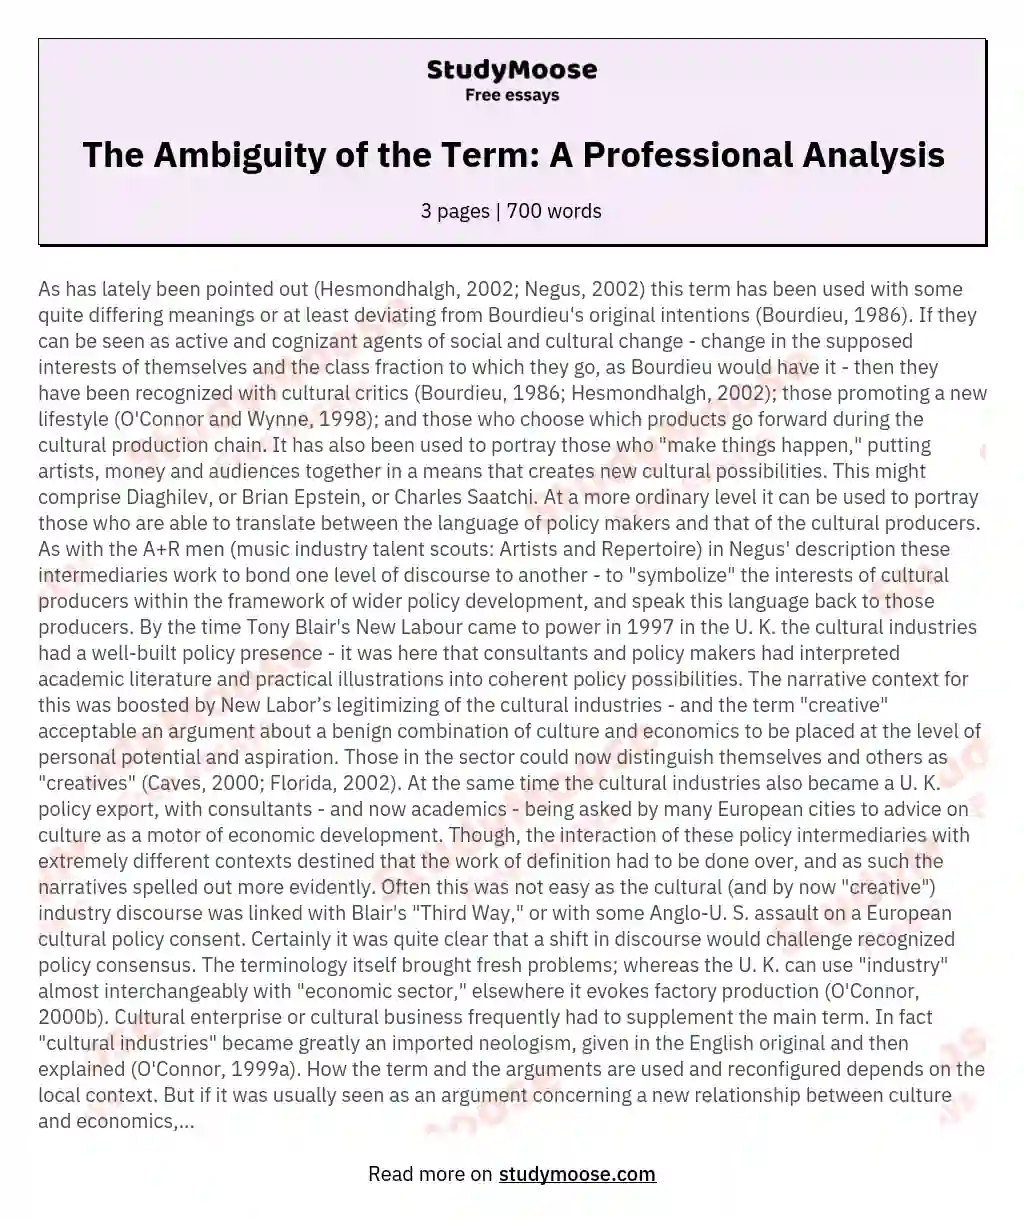 The Ambiguity of the Term: A Professional Analysis essay